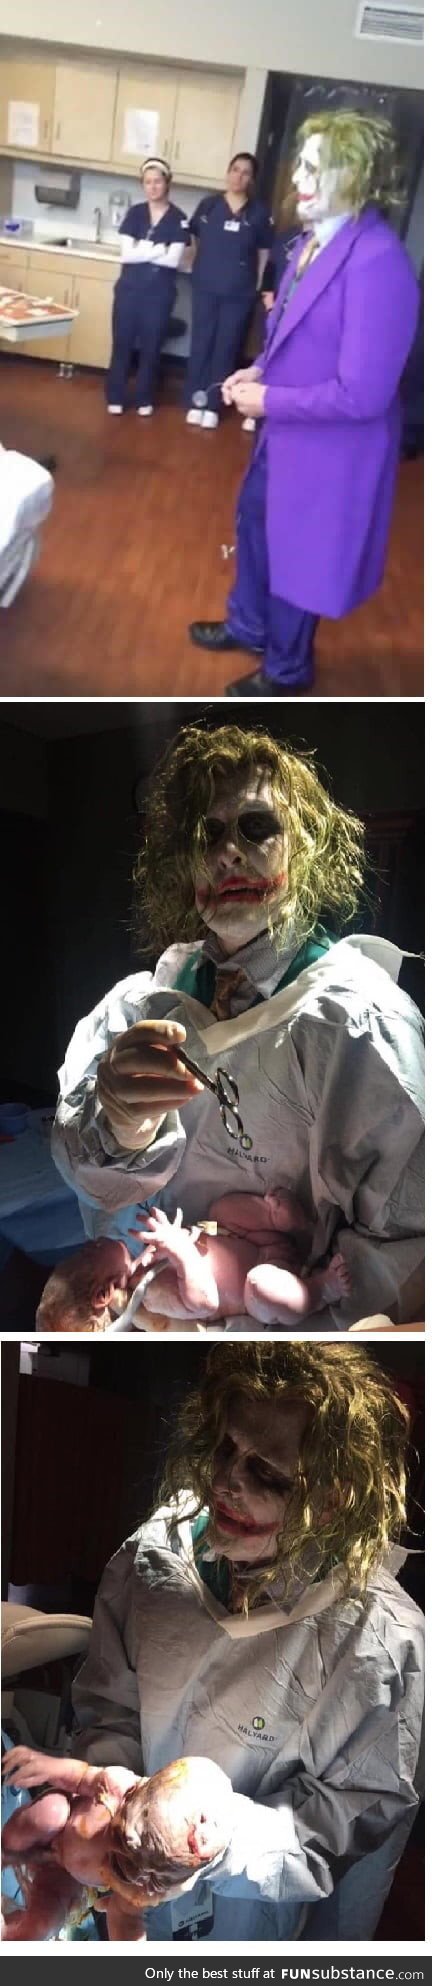 This doctor was at a Halloween party and one of his patients went into labor